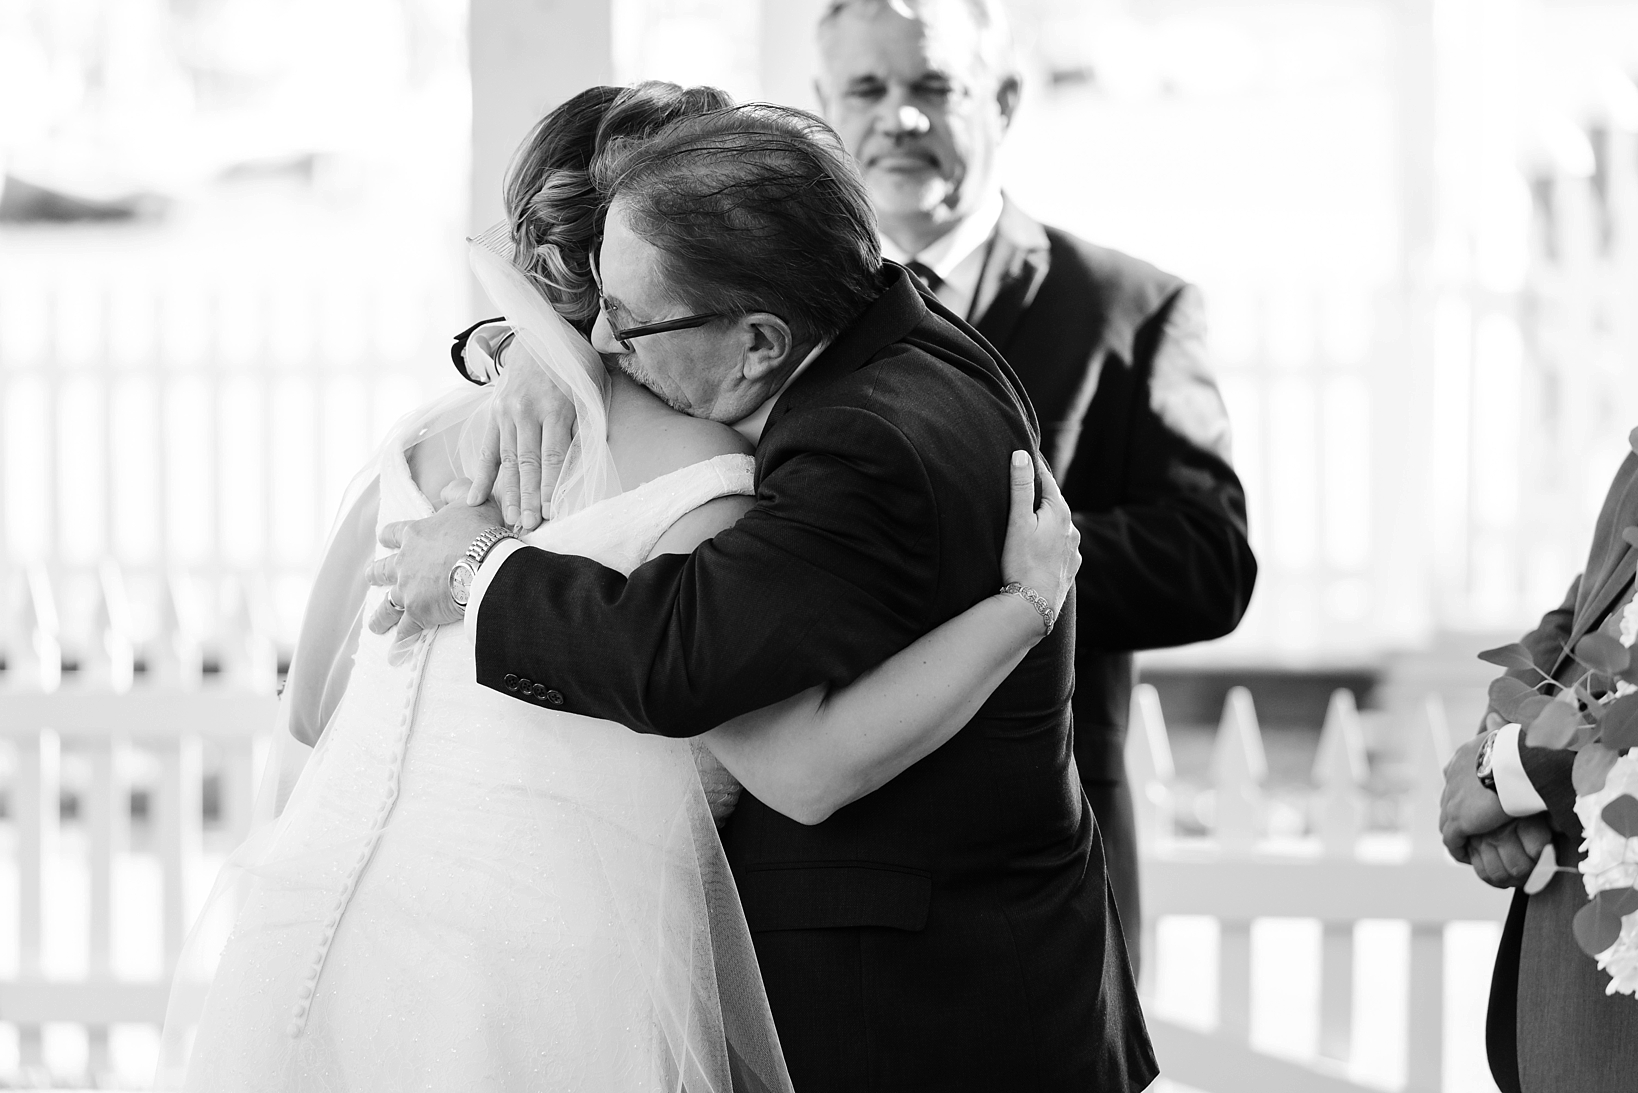 Father hugs his daughter during the wedding ceremony in black and white